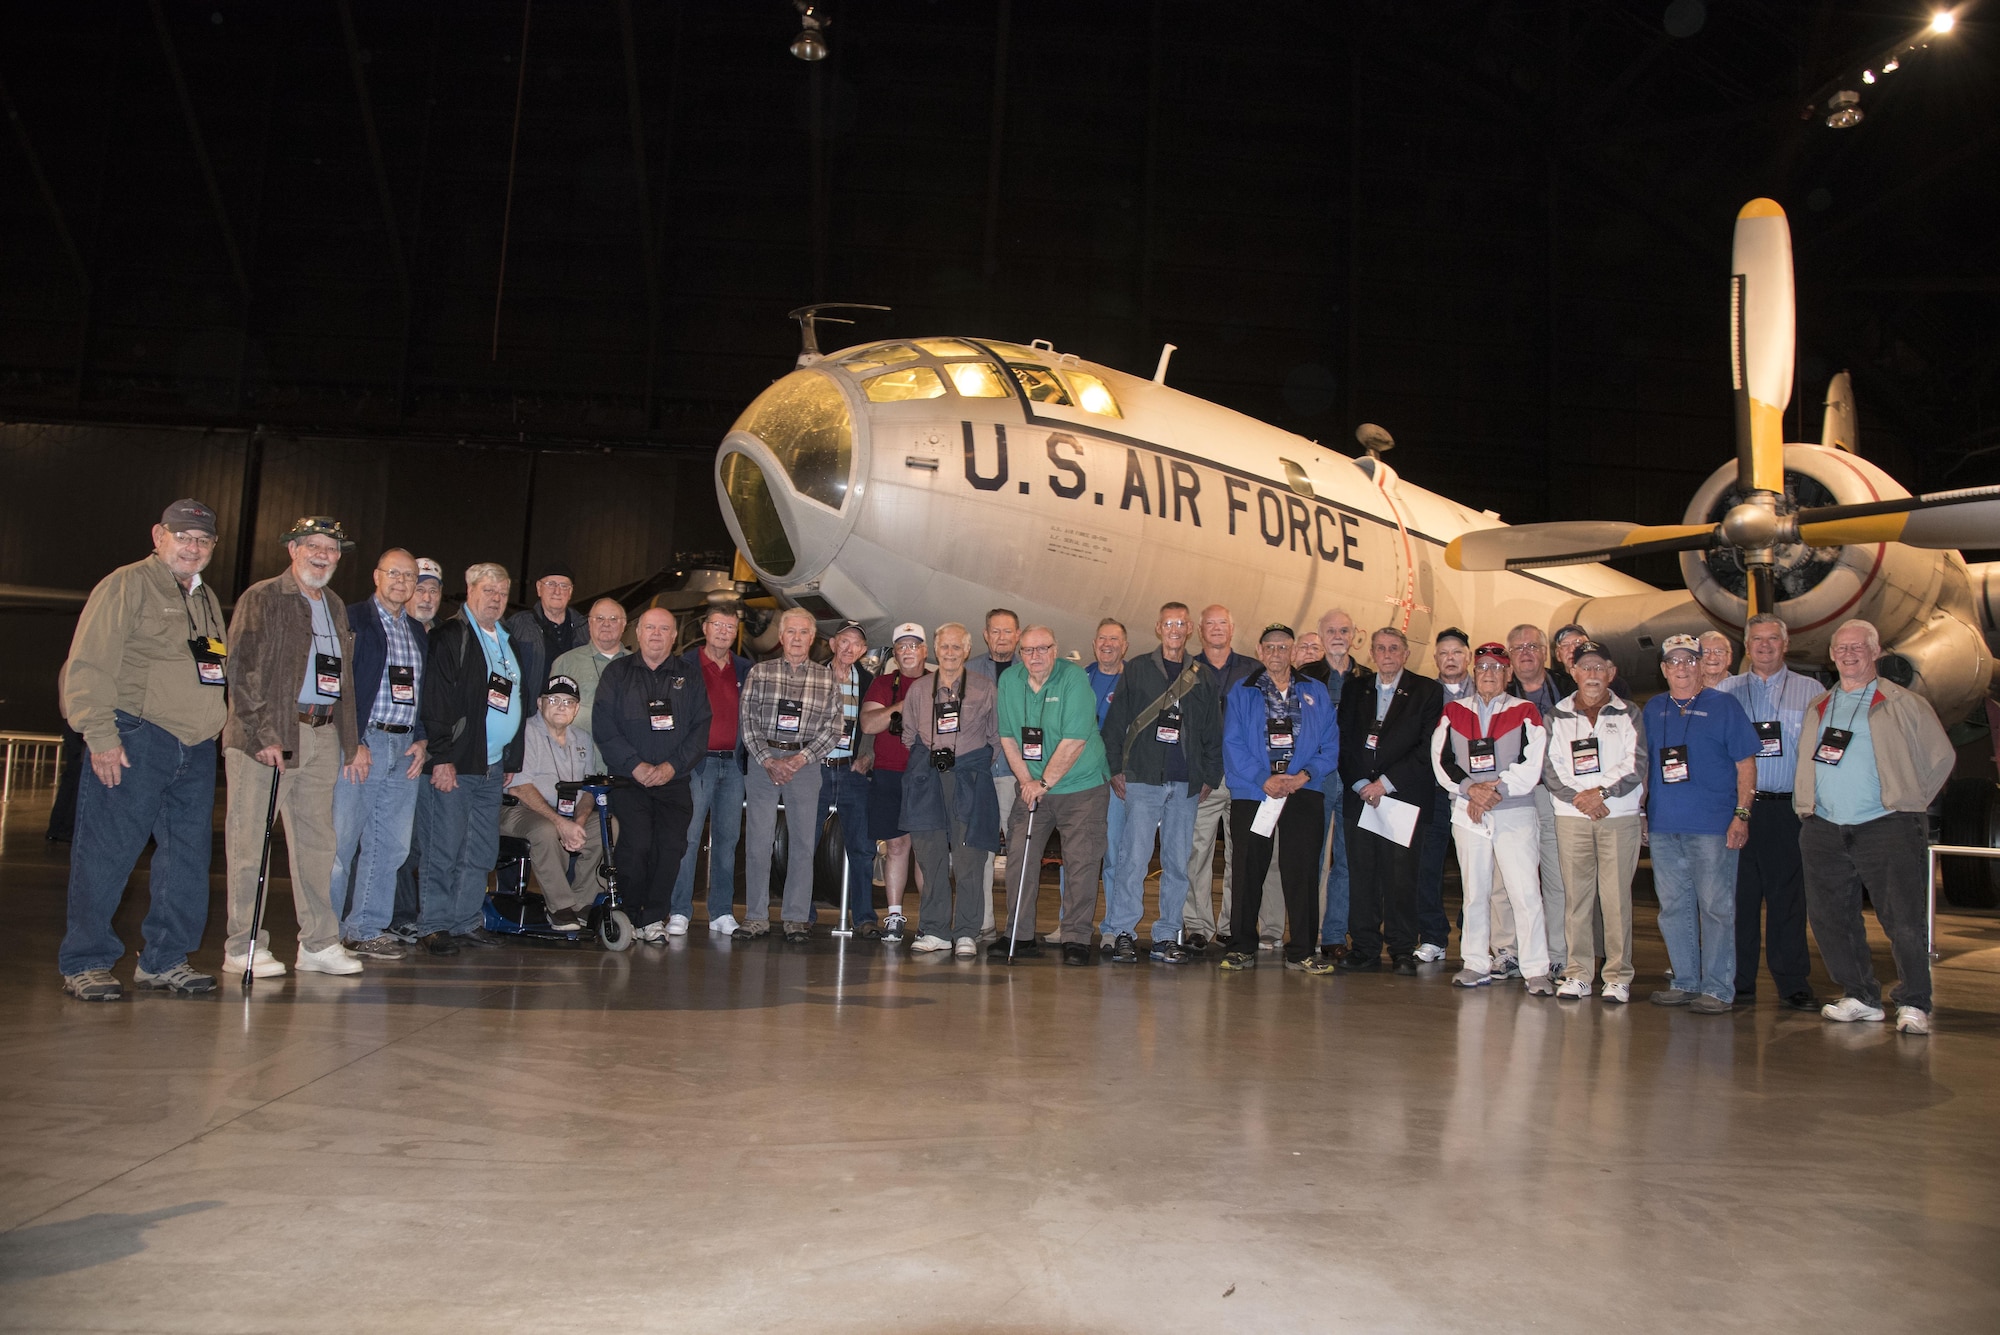 DAYTON, Ohio -- Air Weather Reconnaissance Association Reunion on Sept. 29, 2016 at the National Museum of the U.S. Air Force. (U.S. Air Force photo)